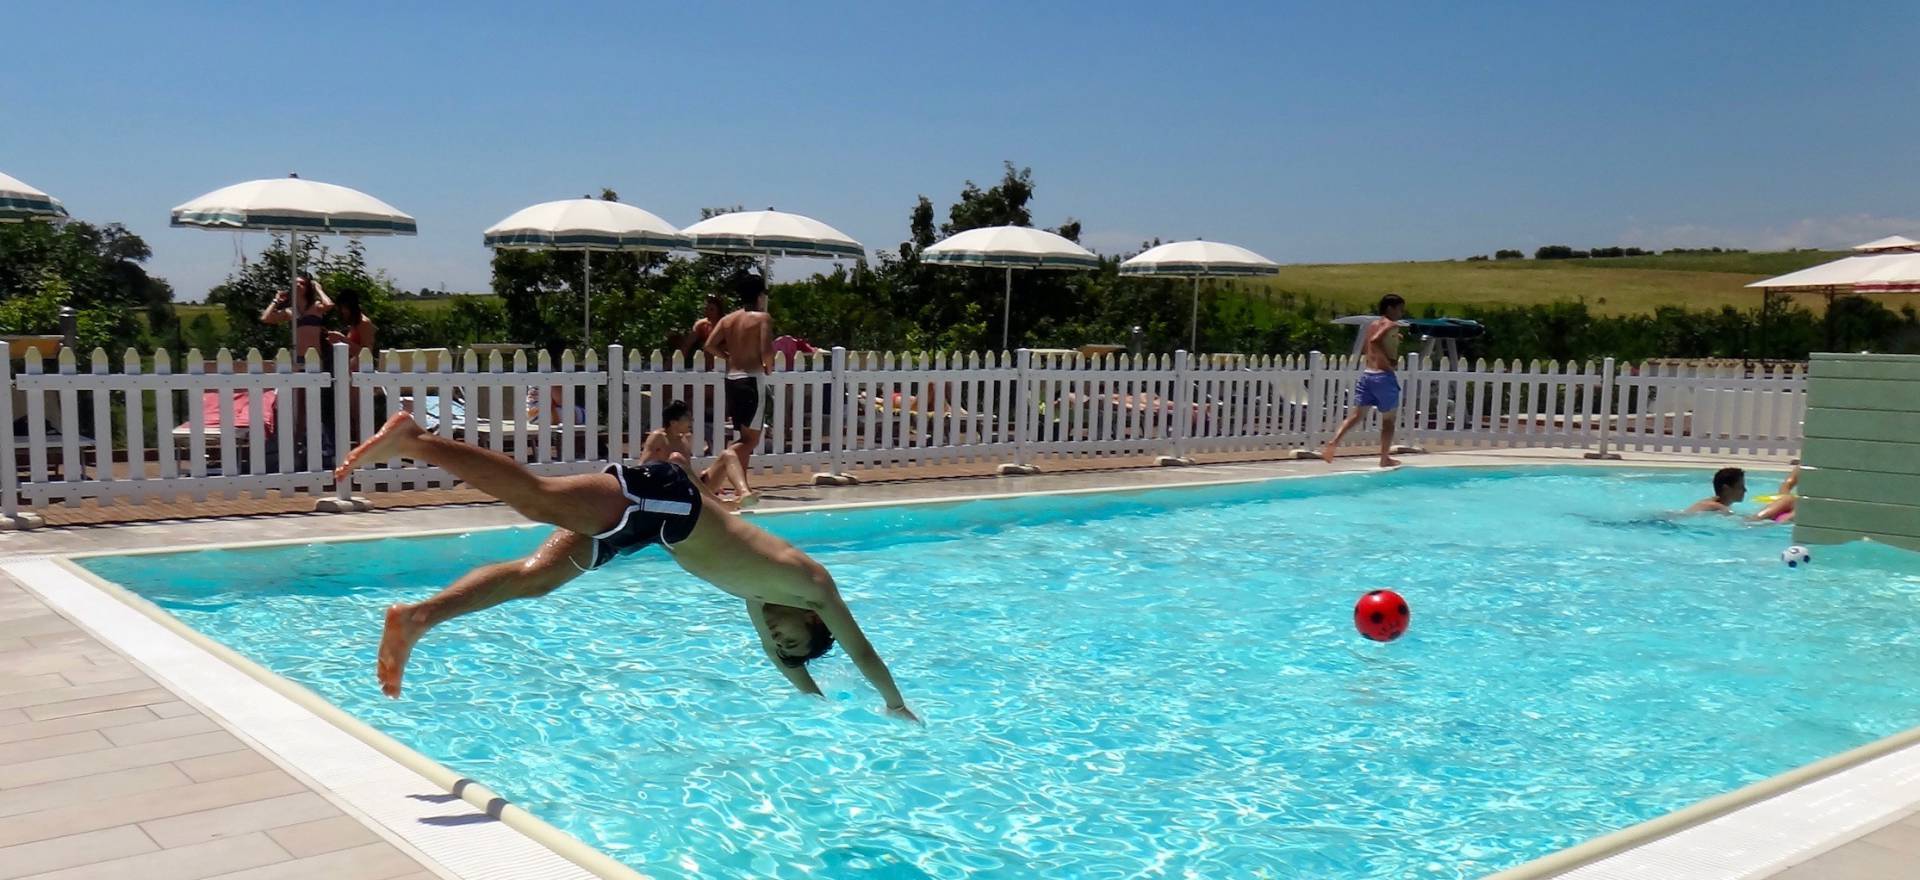 Agriturismo Marche Child-friendly agriturismo Marche with sea view